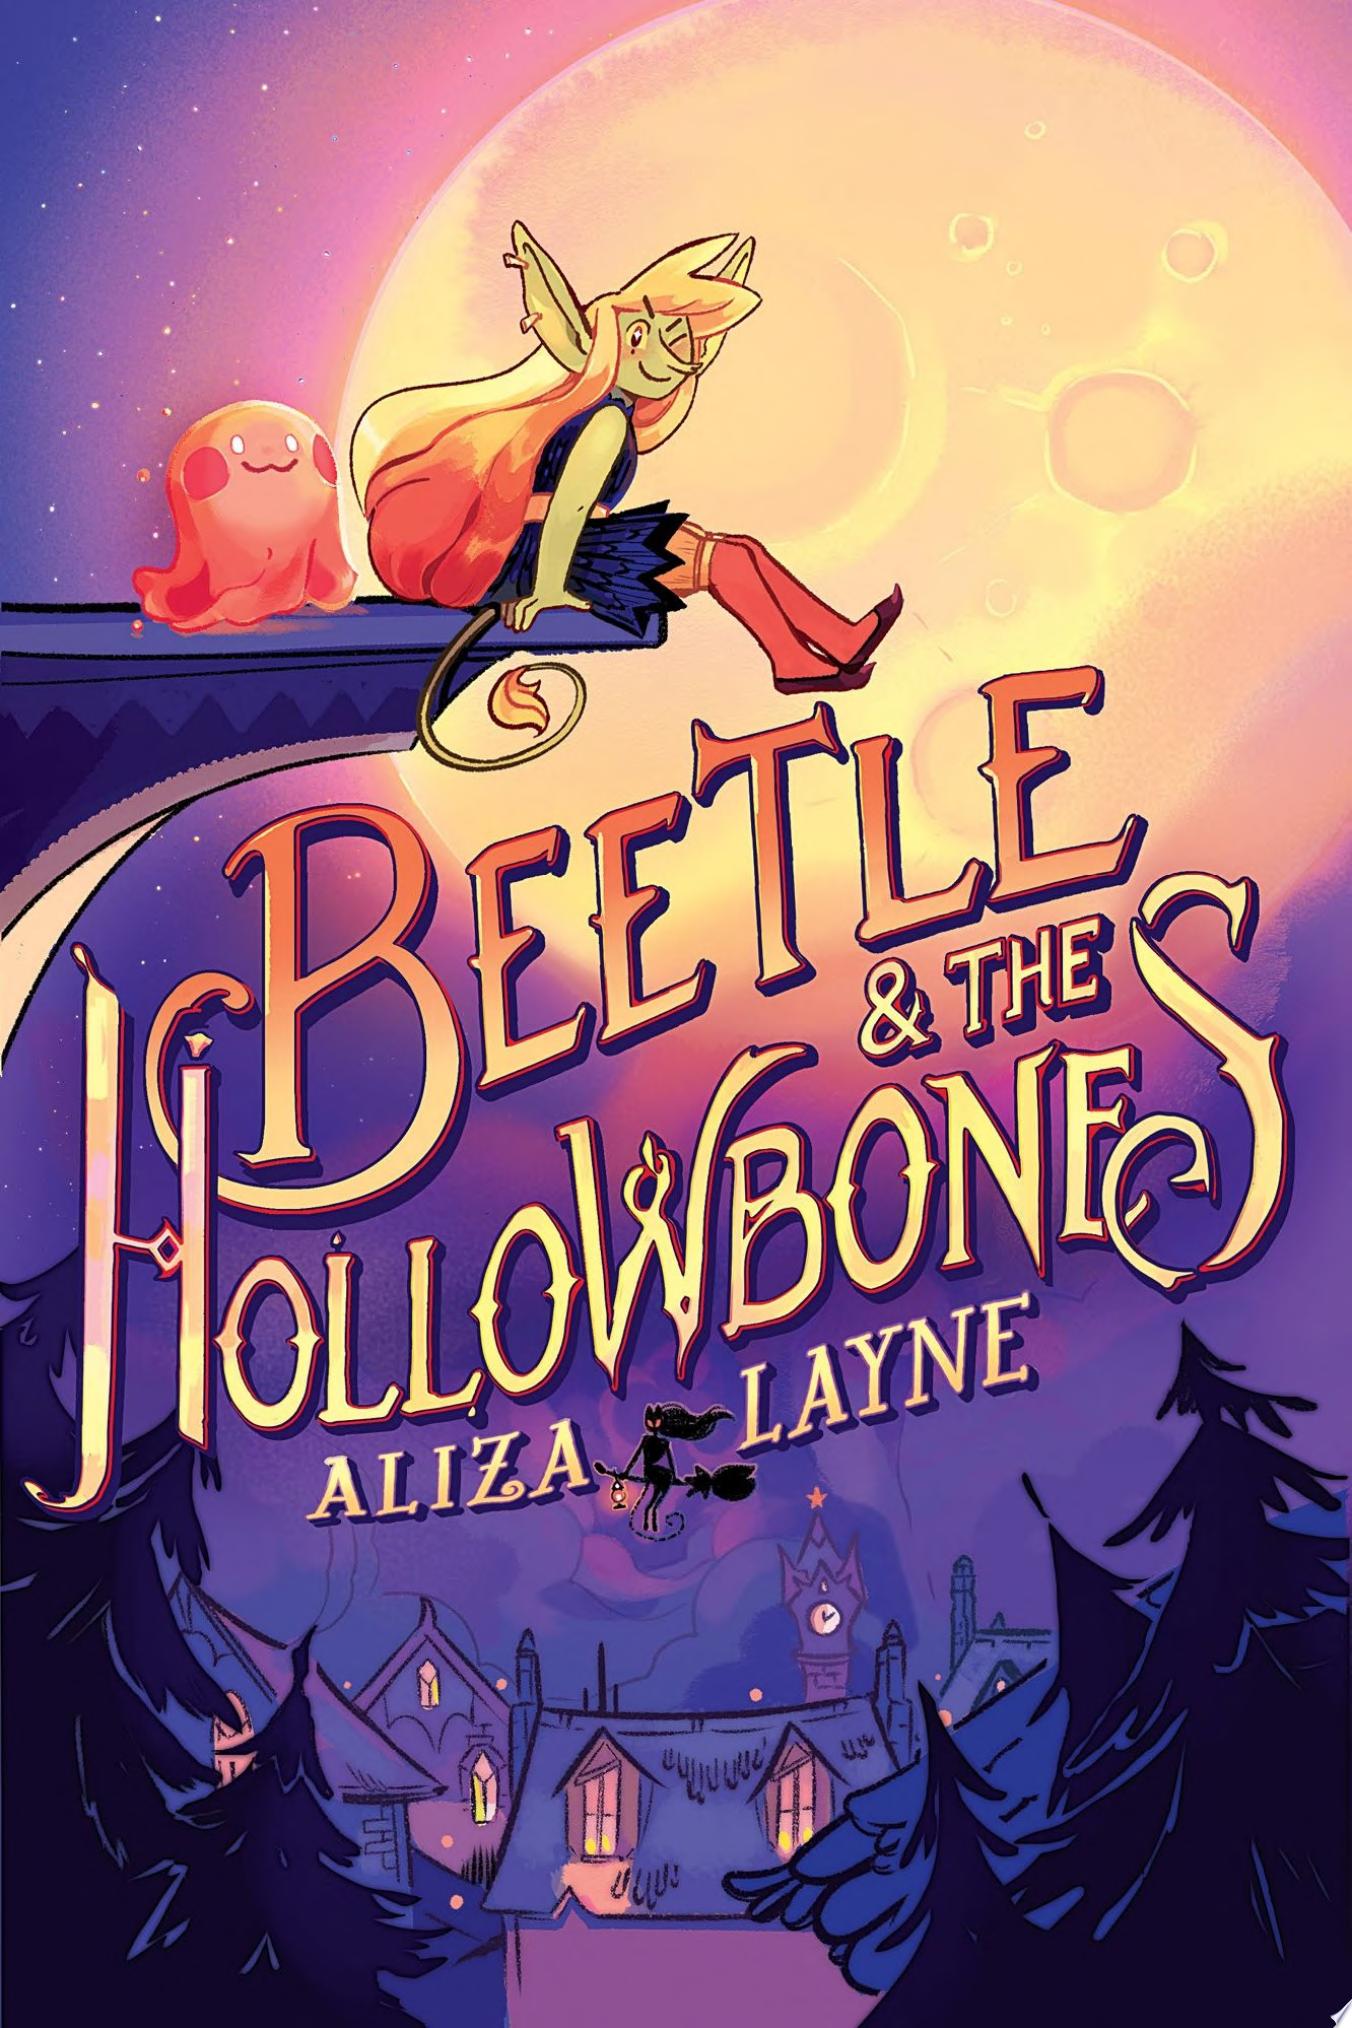 Image for "Beetle & the Hollowbones"